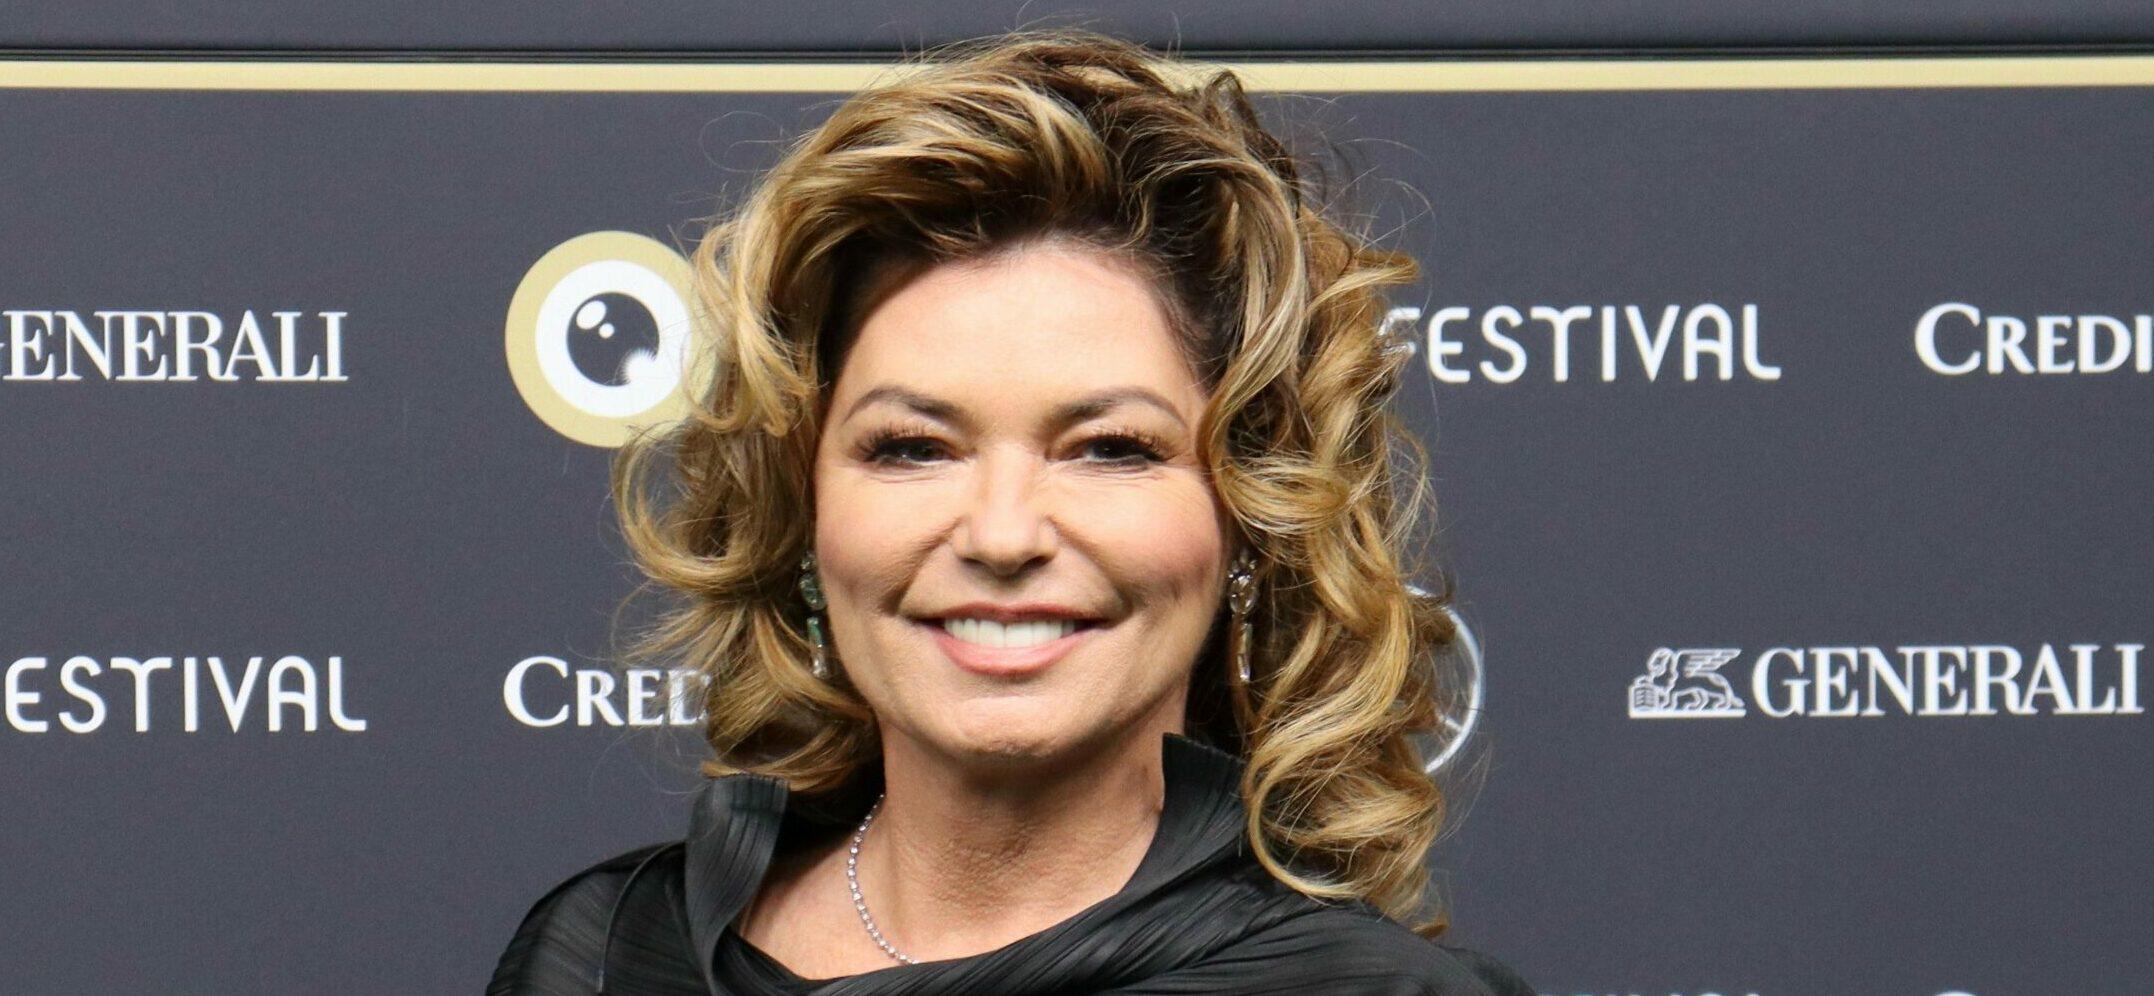 Shania Twain Had To Be Awake And Sing While Undergoing Major Surgery Due To Lyme Disease